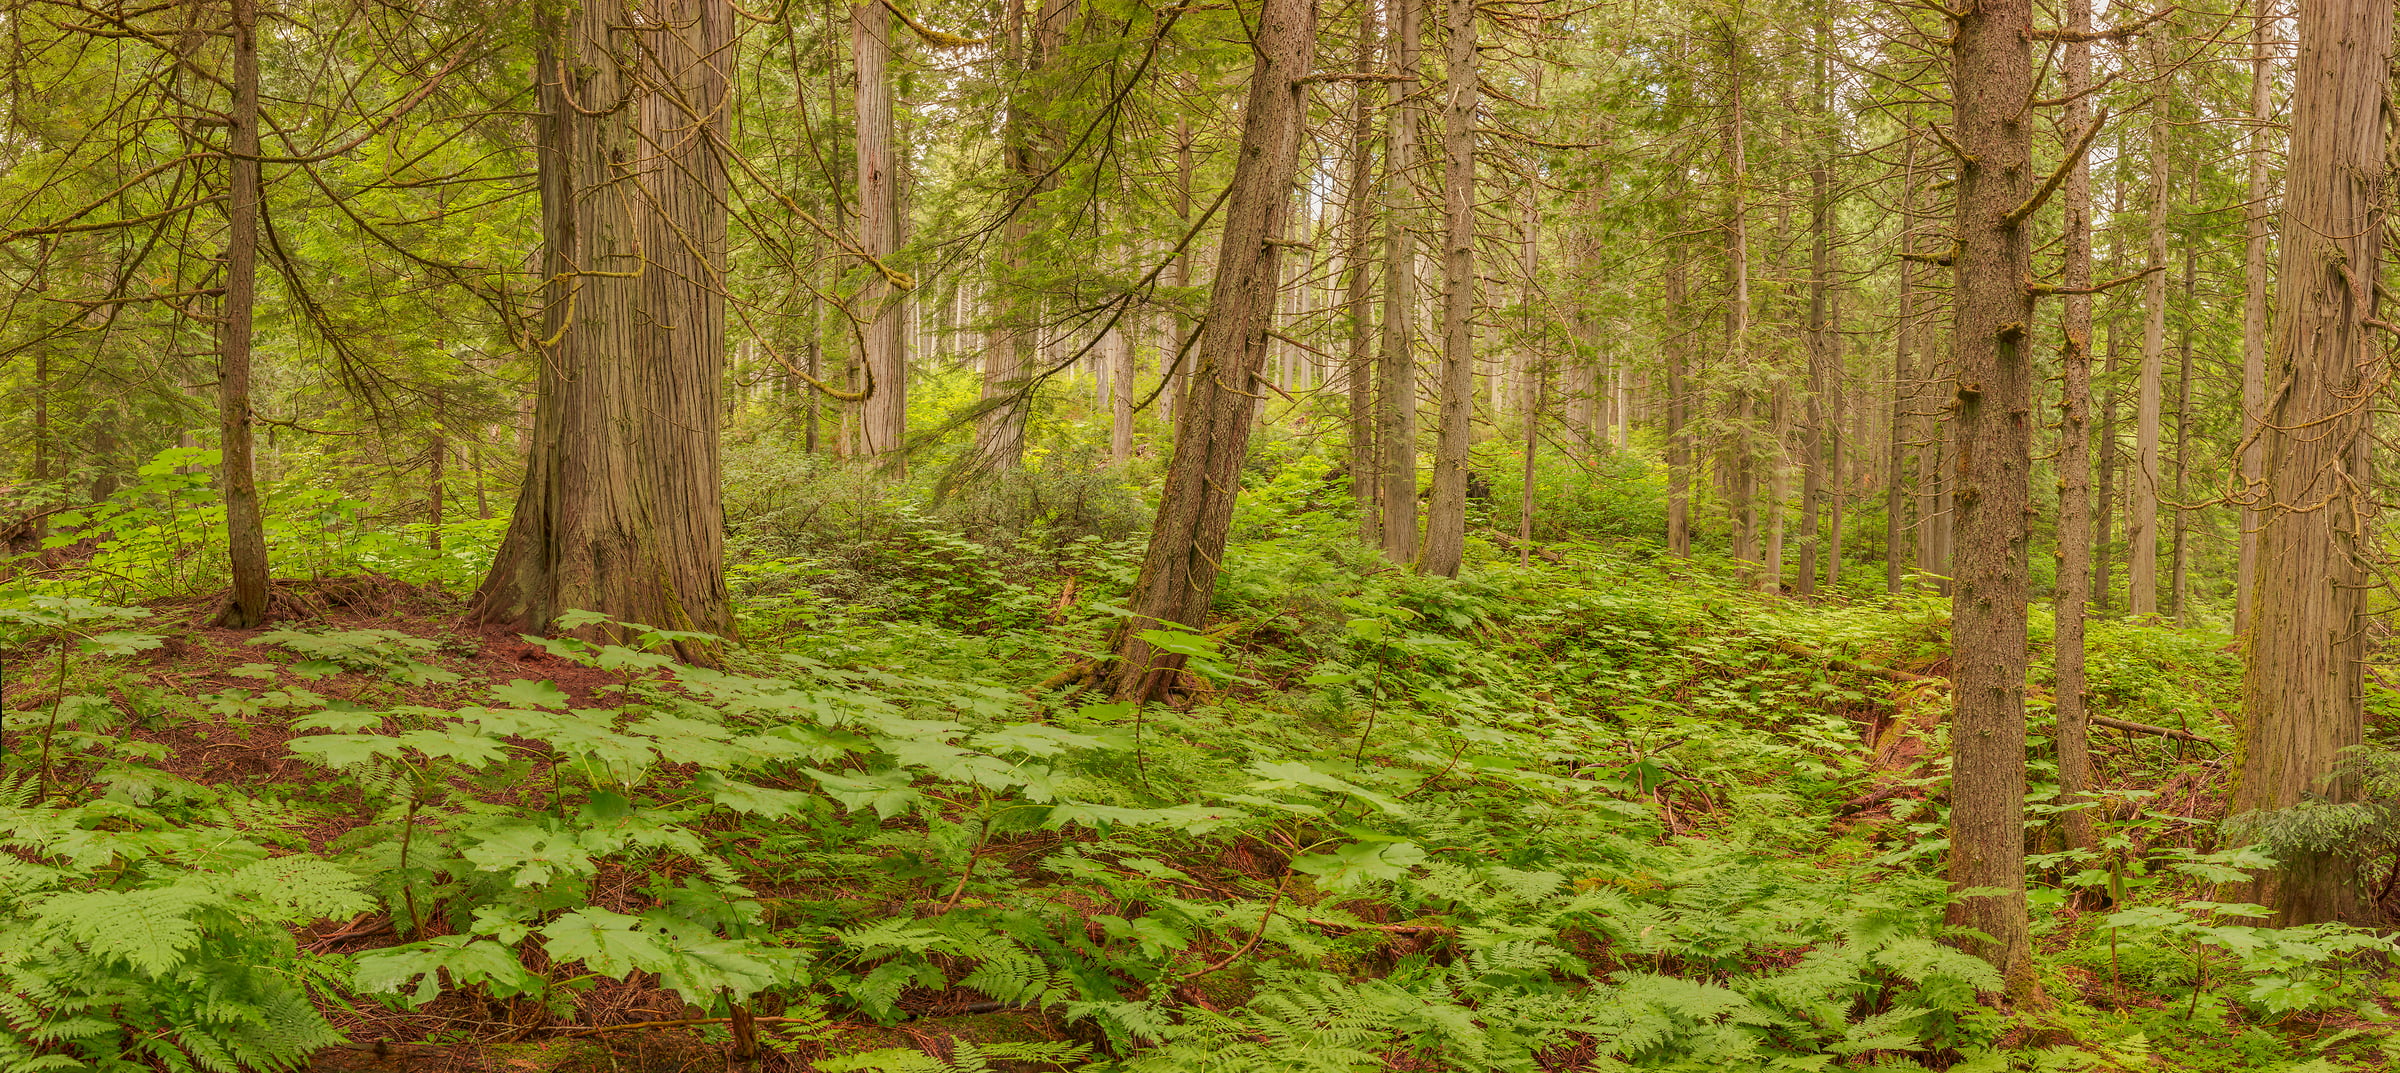 364 megapixels! A very high resolution, large-format VAST photo print of a natural forest scene; photograph created by John Freeman in Giant Cedars Boardwalk Trail, Mount Revelstoke National Park, British Columbia, Canada